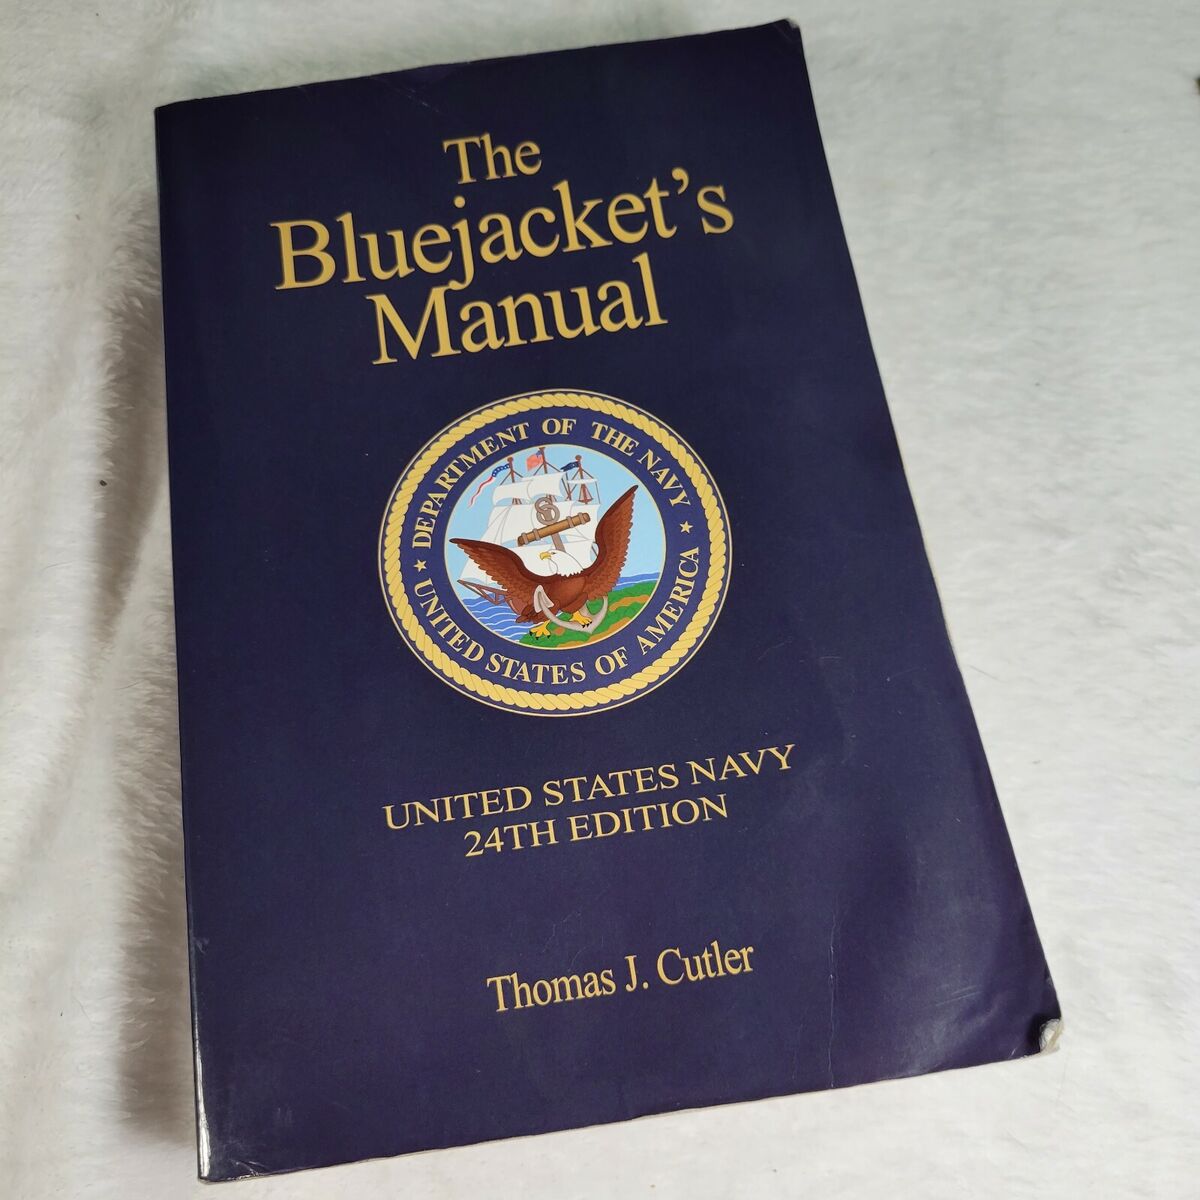 The Bluejacket's Manual 24TH EDITION